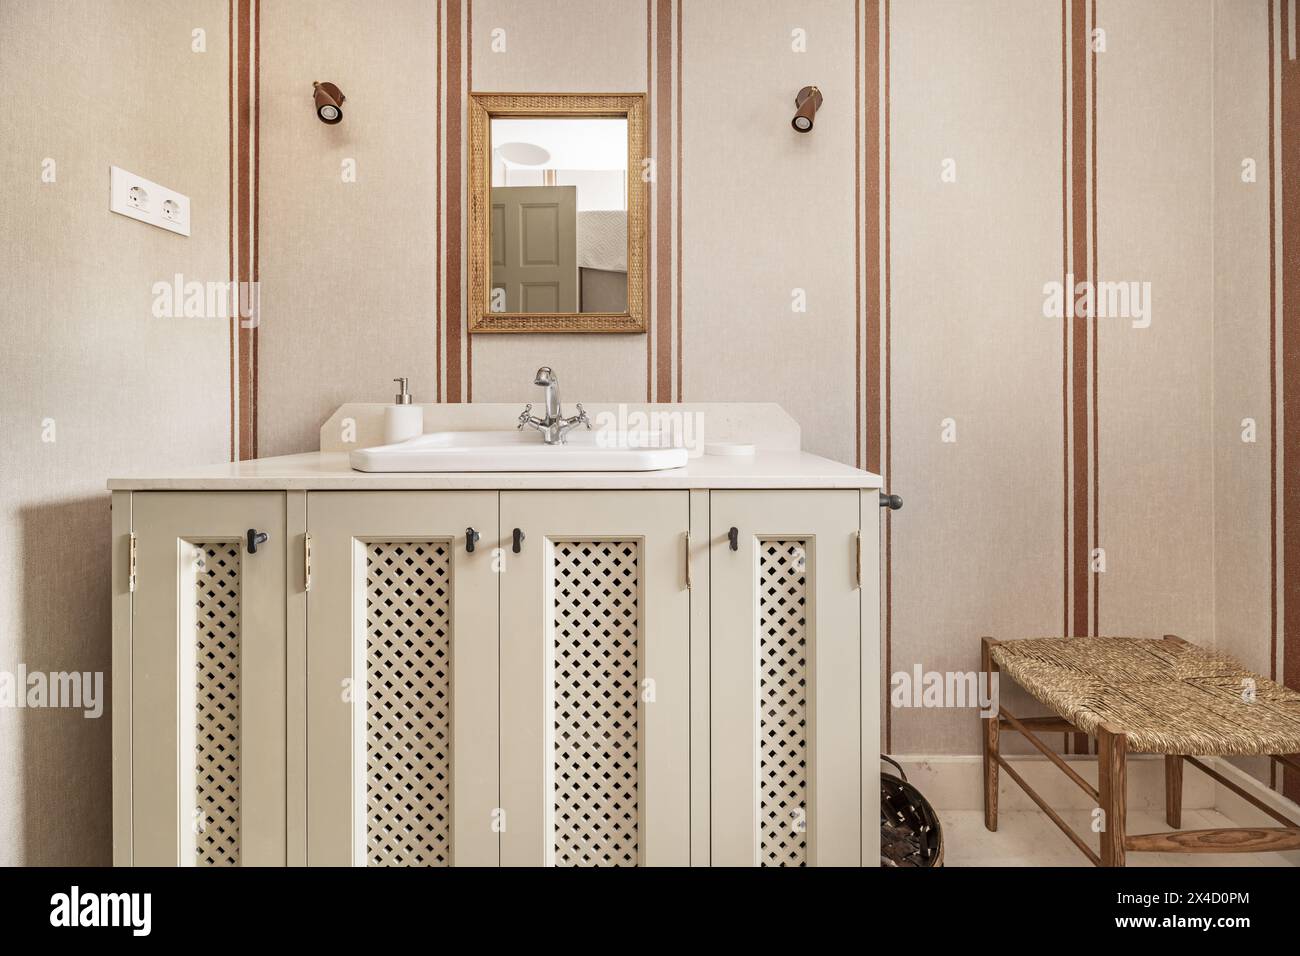 Bathroom with cream marble countertop, gold-framed mirrors, striped wallpaper, white porcelain sink on cabinet with wooden lattice doors Stock Photo